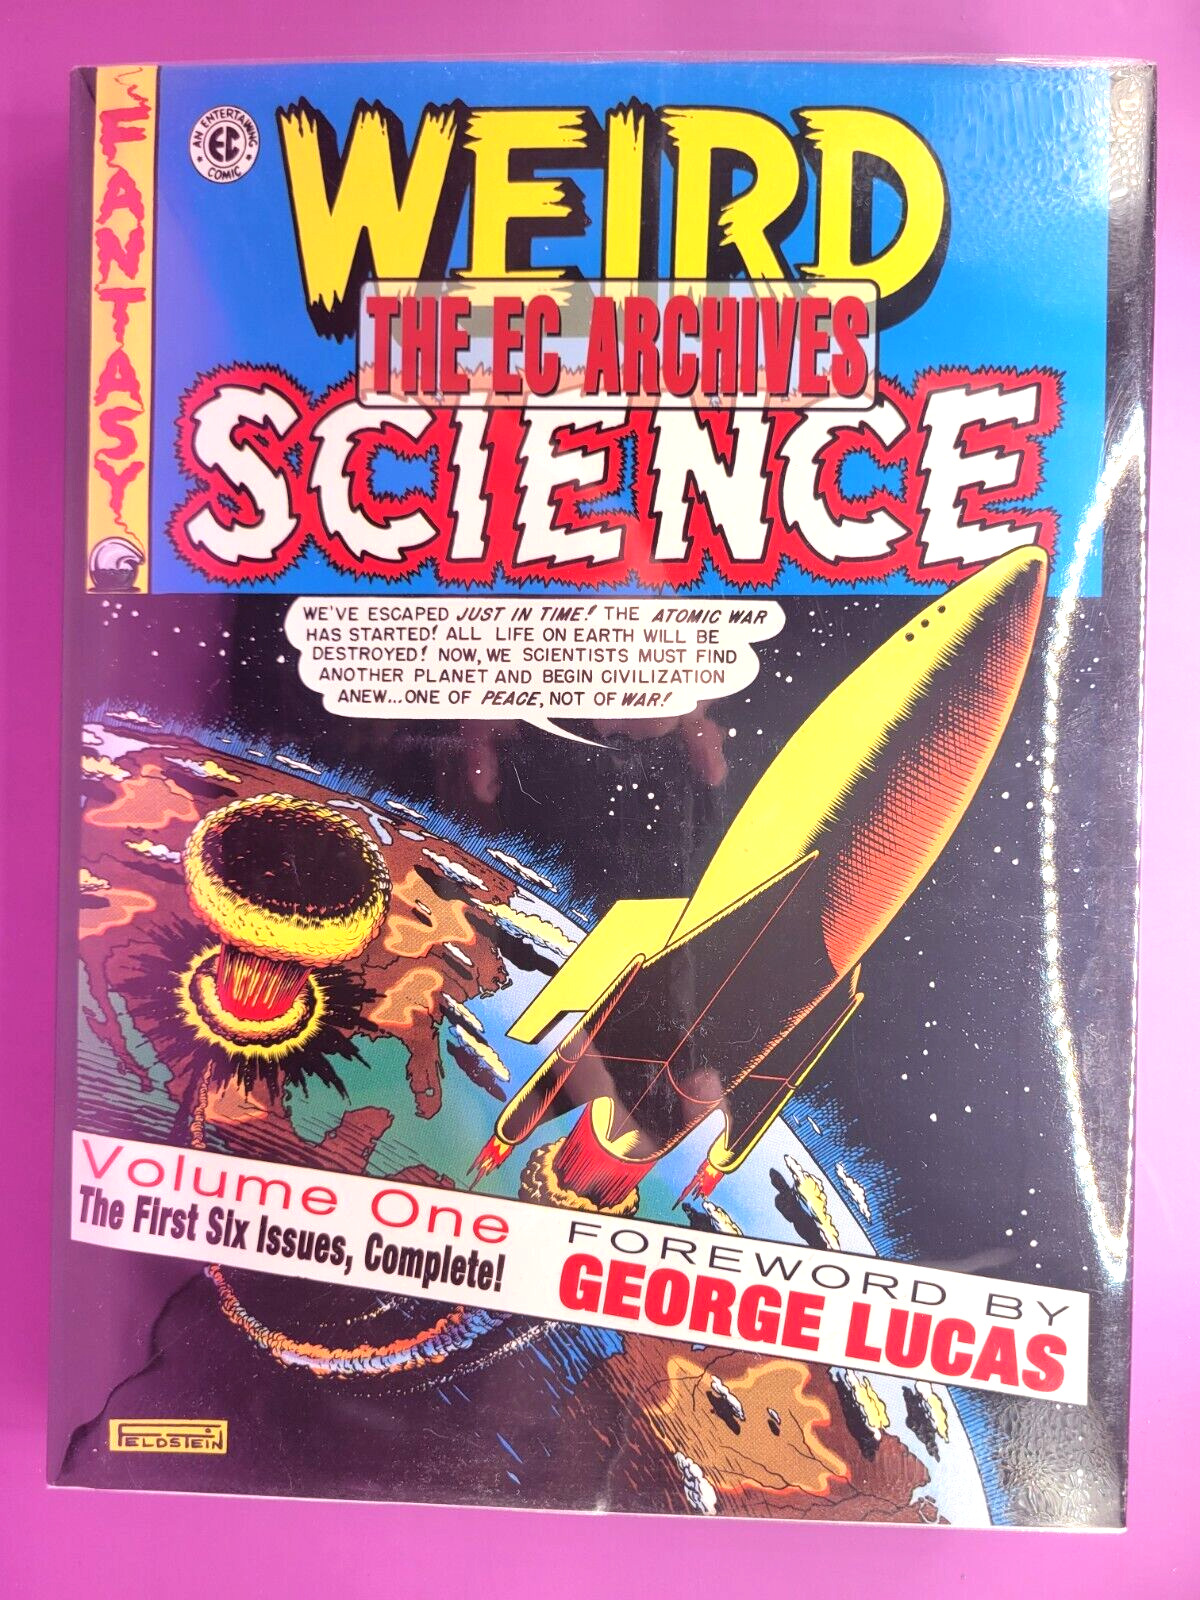 WEIRD SCIENCE #1 EC ARCHIVES HARDCOVER GREAT SHAPE    24K